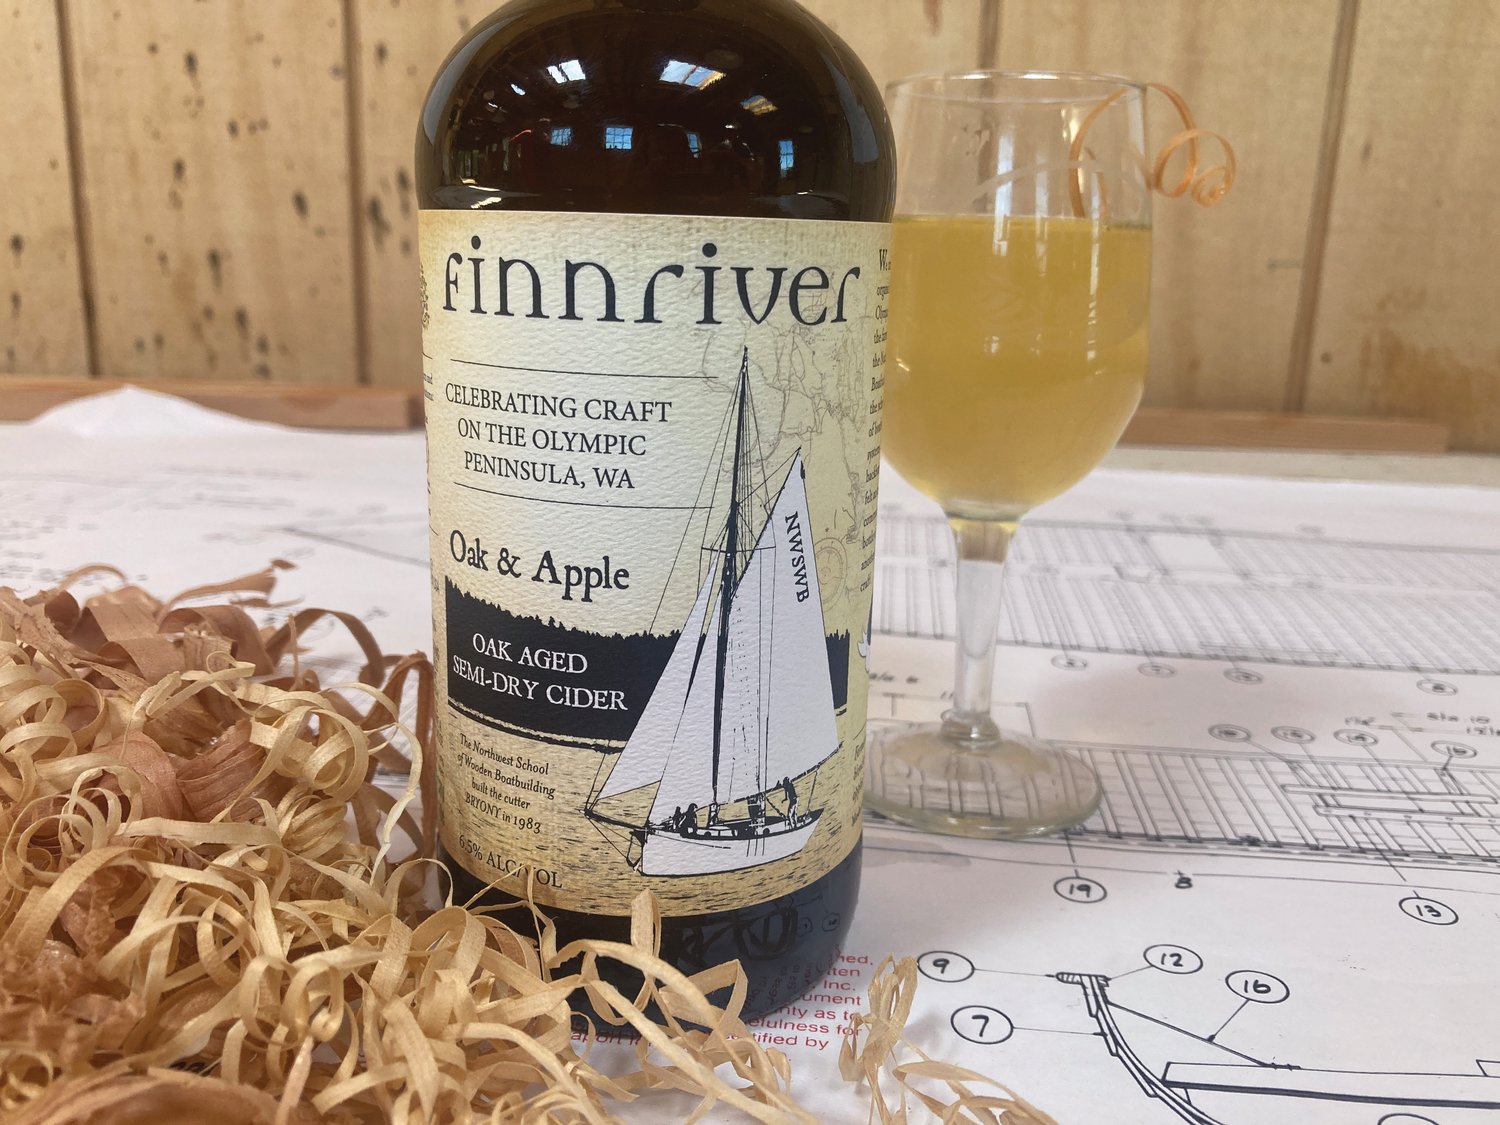 The Northwest School of Wooden Boat Building has teamed up with Finnriver to produce their Oak & Apple dry cider